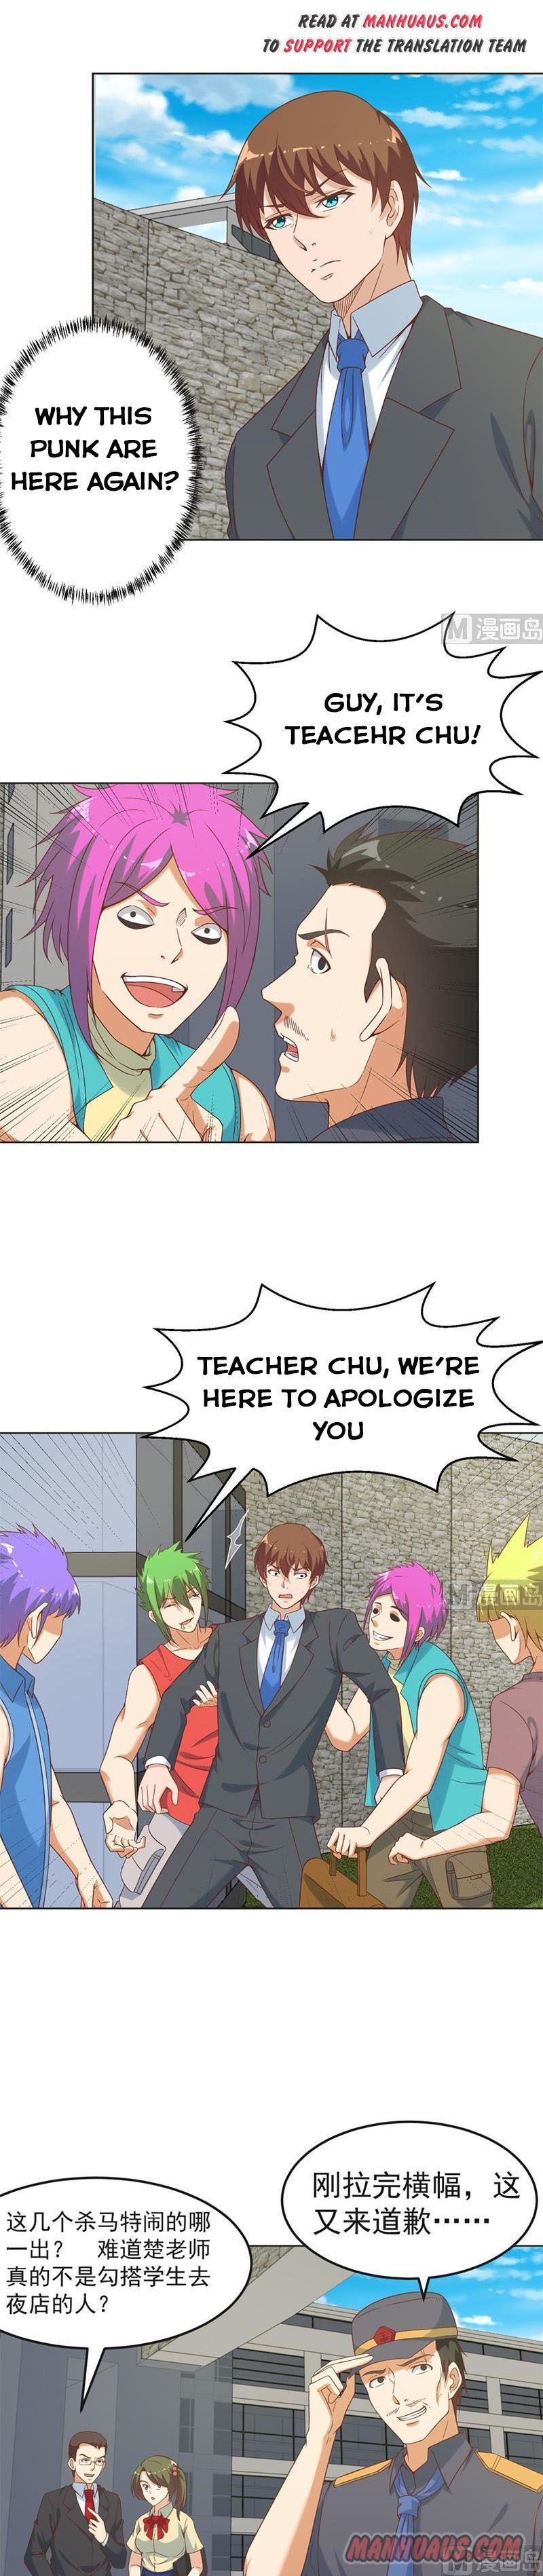 Cultivation Return on Campus Chapter 47 page 2